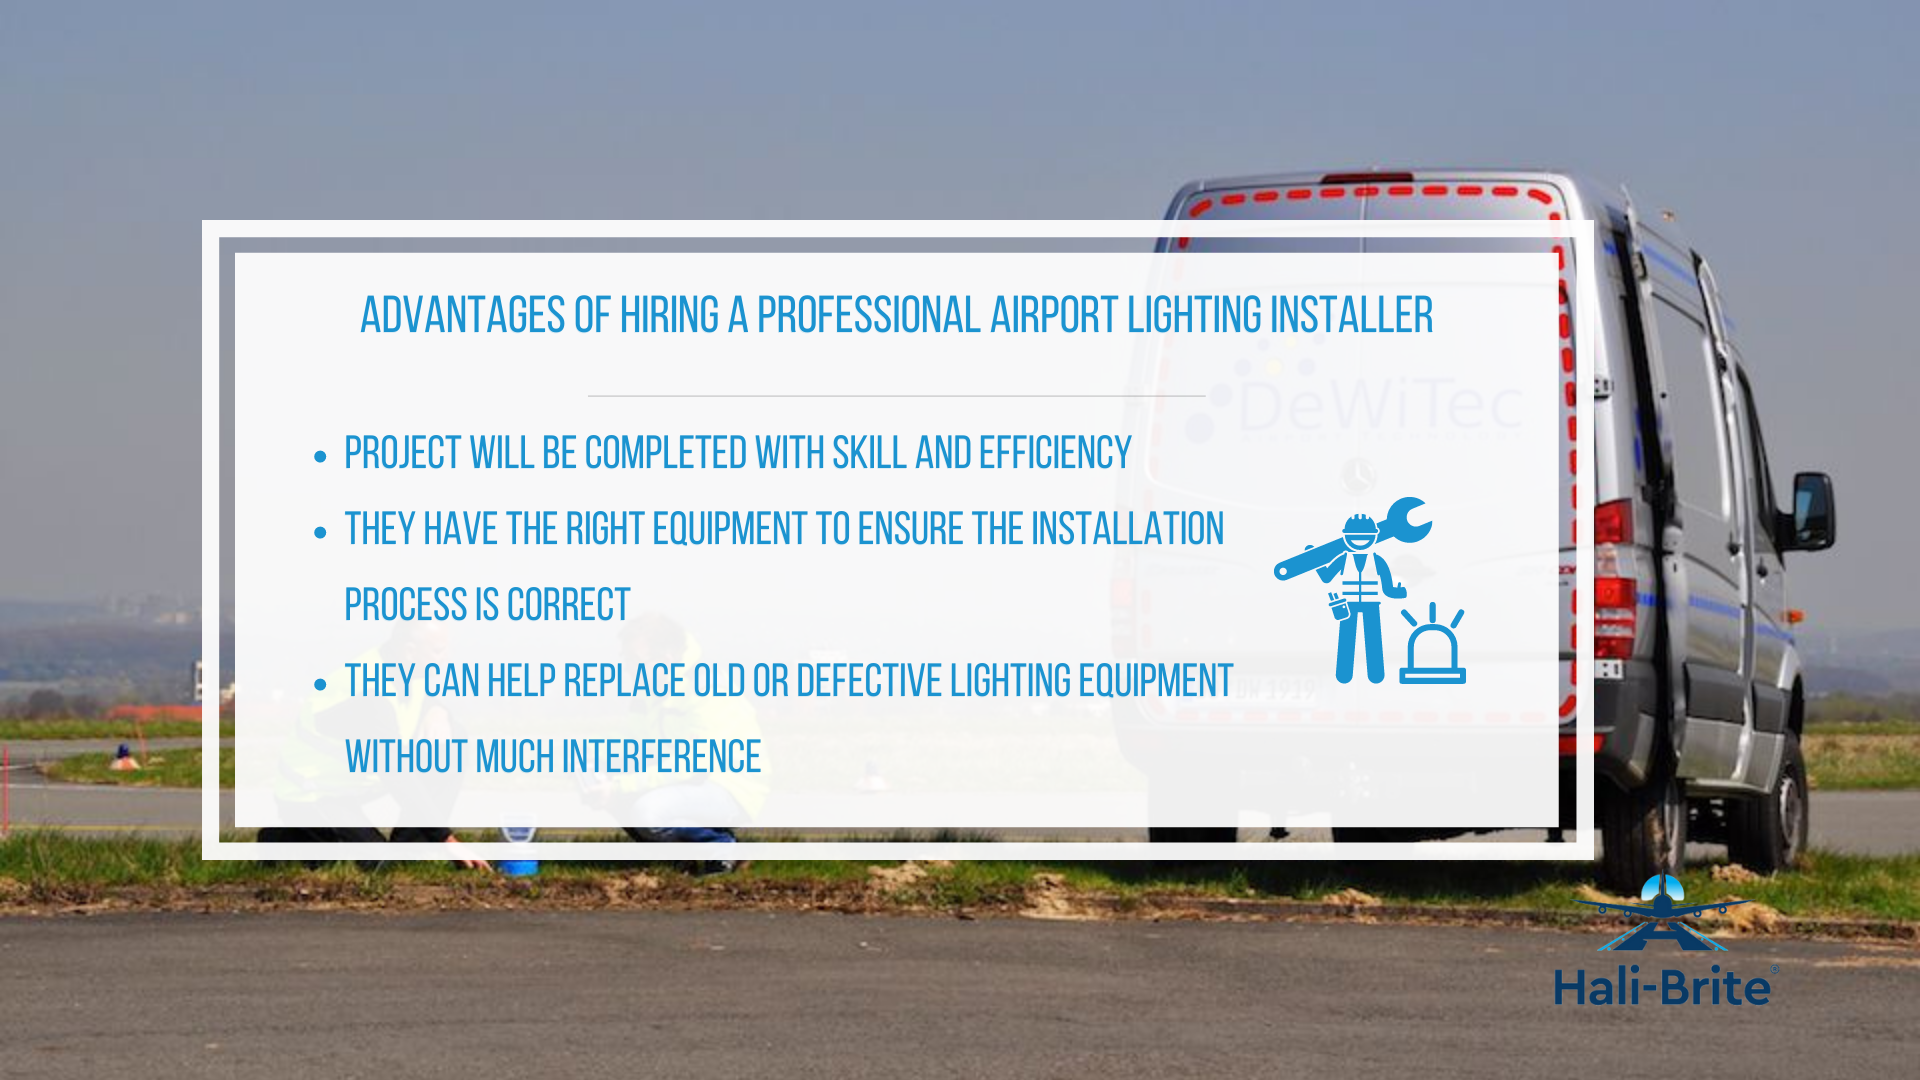 Infographic image of the advantages of hiring a professional airport lighting installer